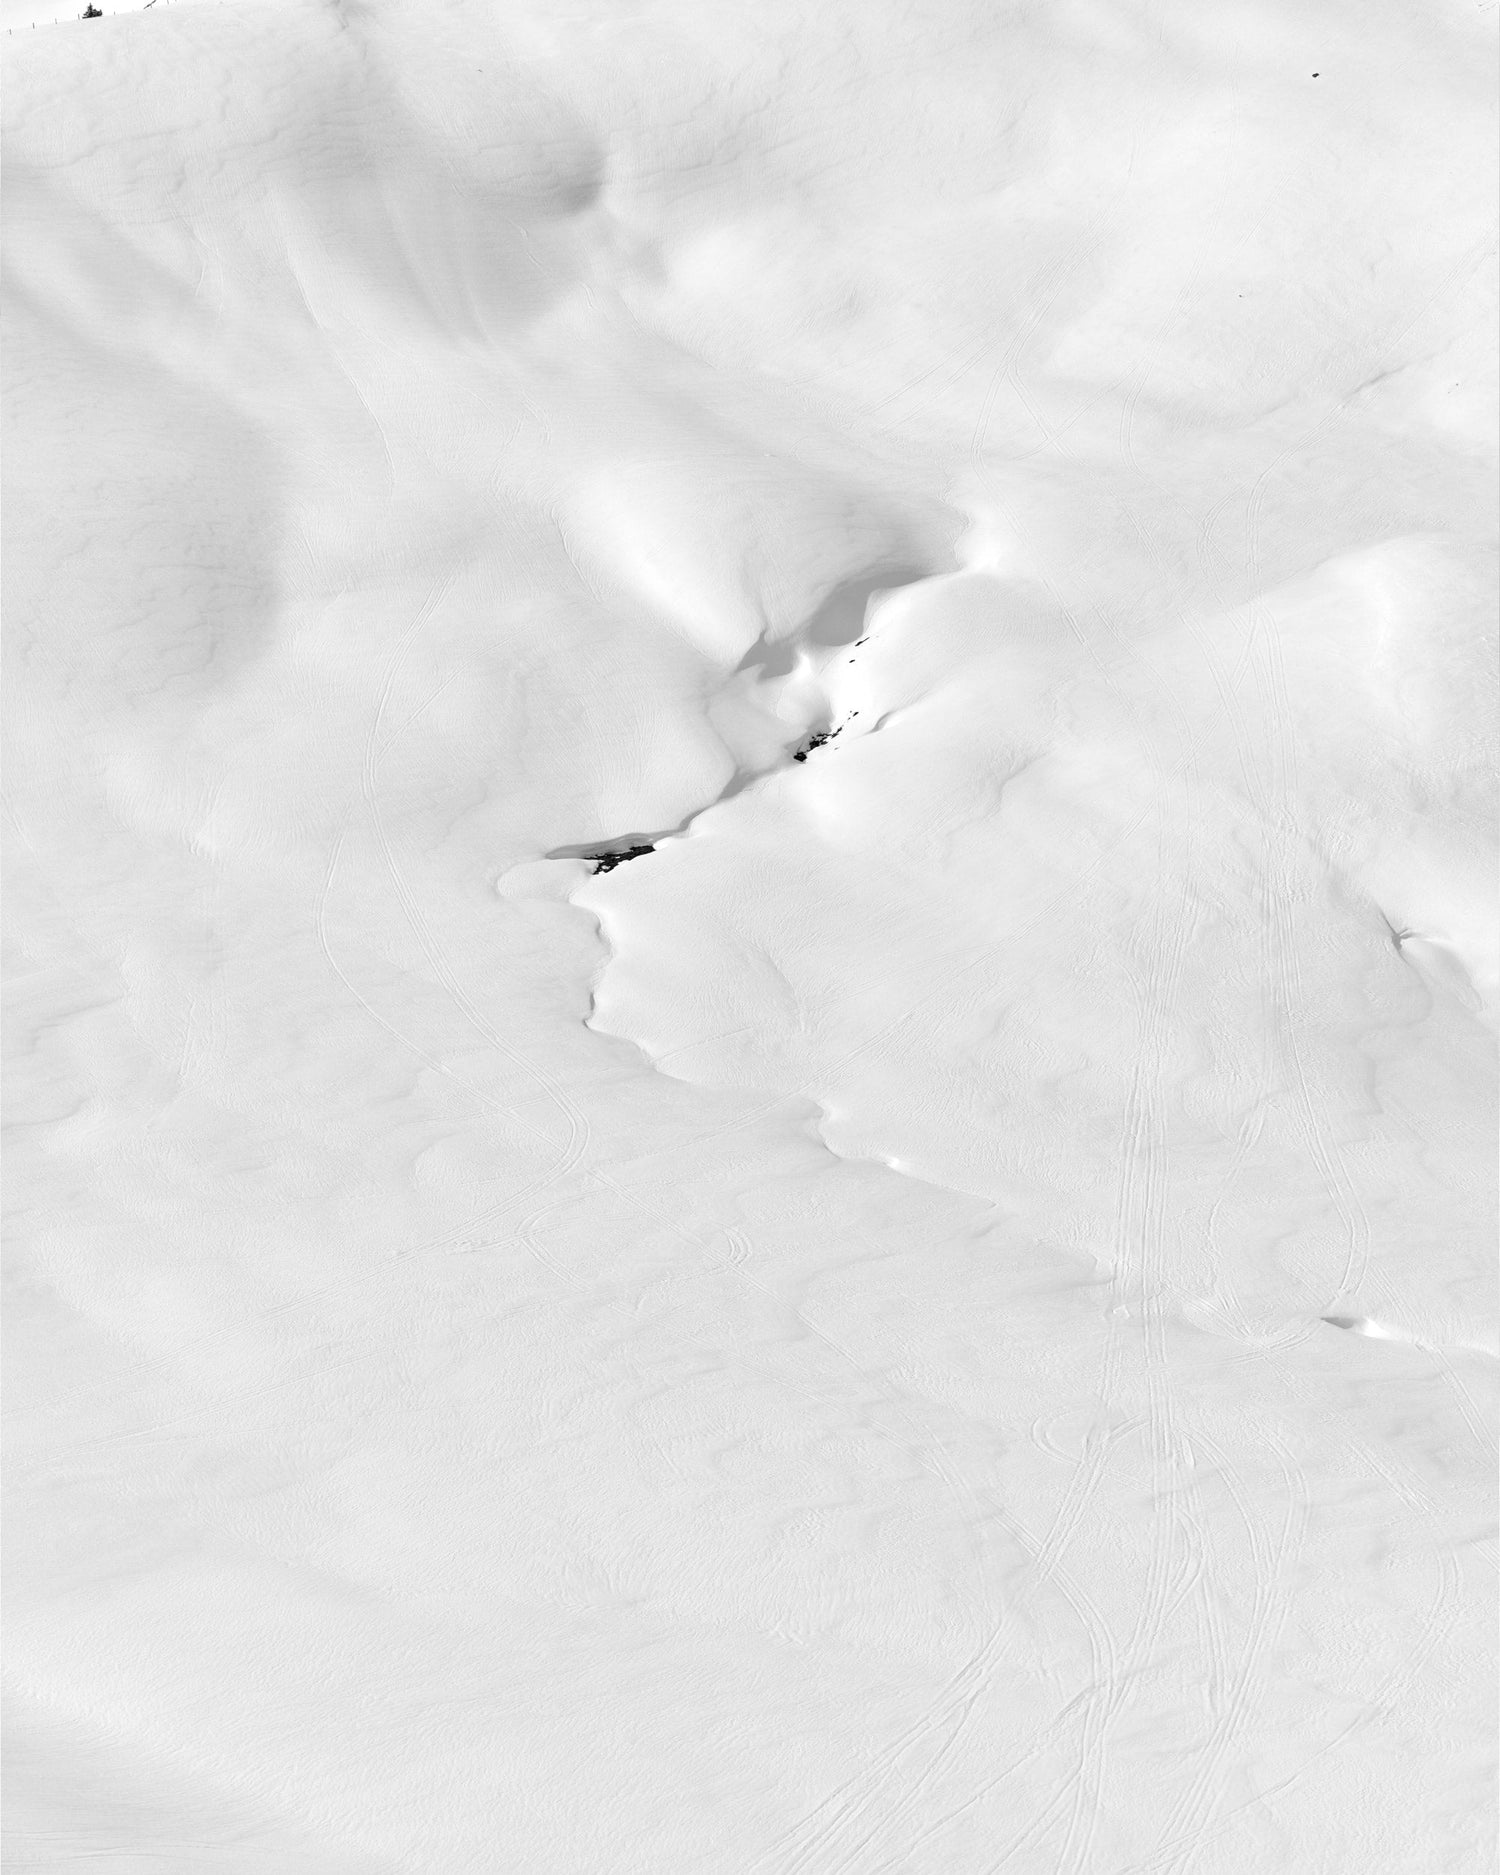 The artpiece 'Riss' by Andreas Ortner shows part of a mountain covered in snow, with a few cracks in the middle of the snow.